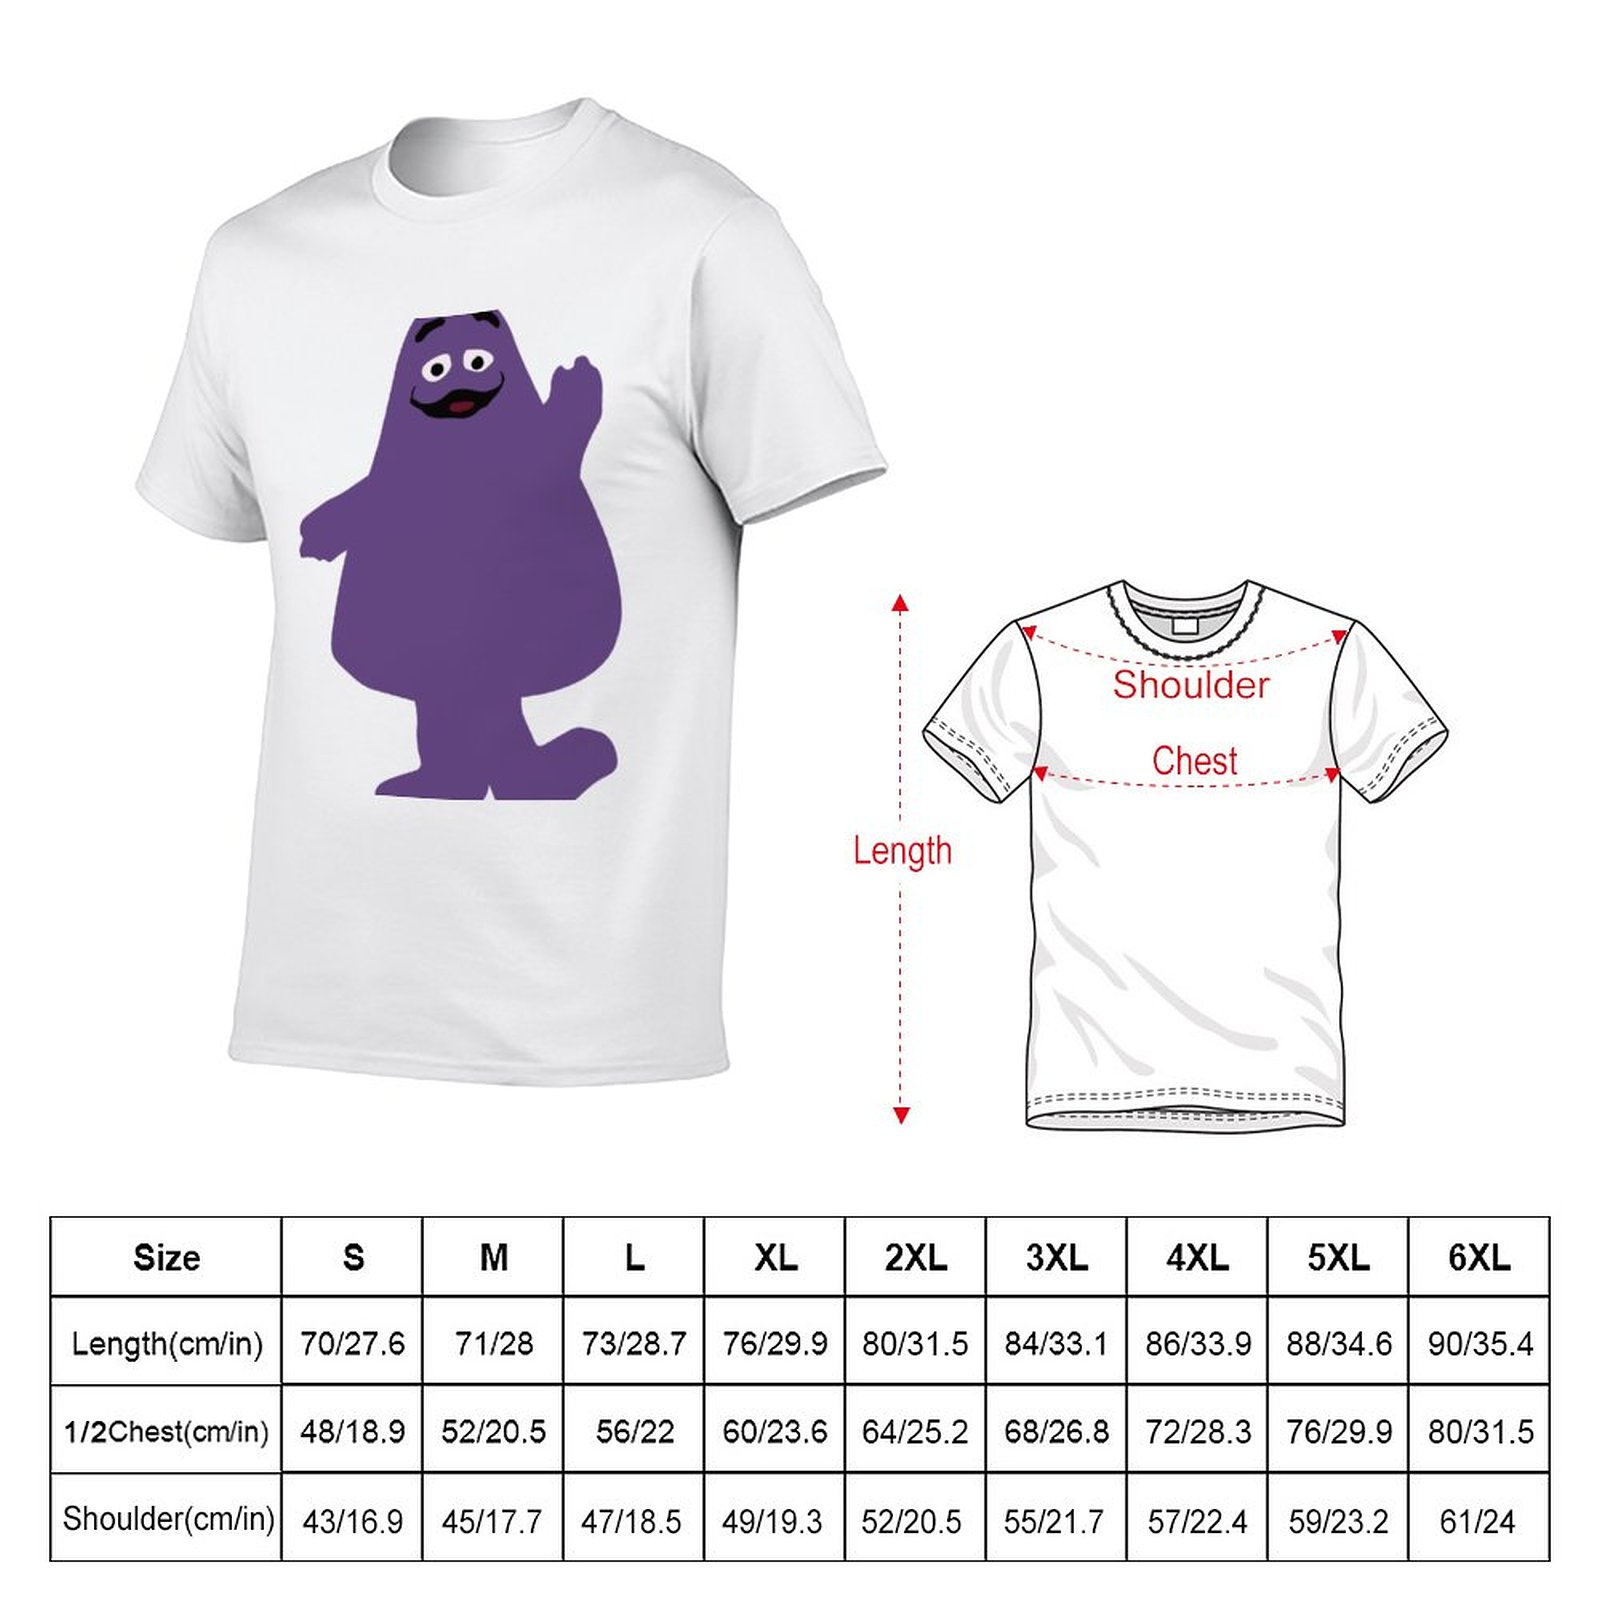 New Grimace T Shirt Tee shirt graphic t shirts boys white t shirts quick drying t 1 - Grimace Plush